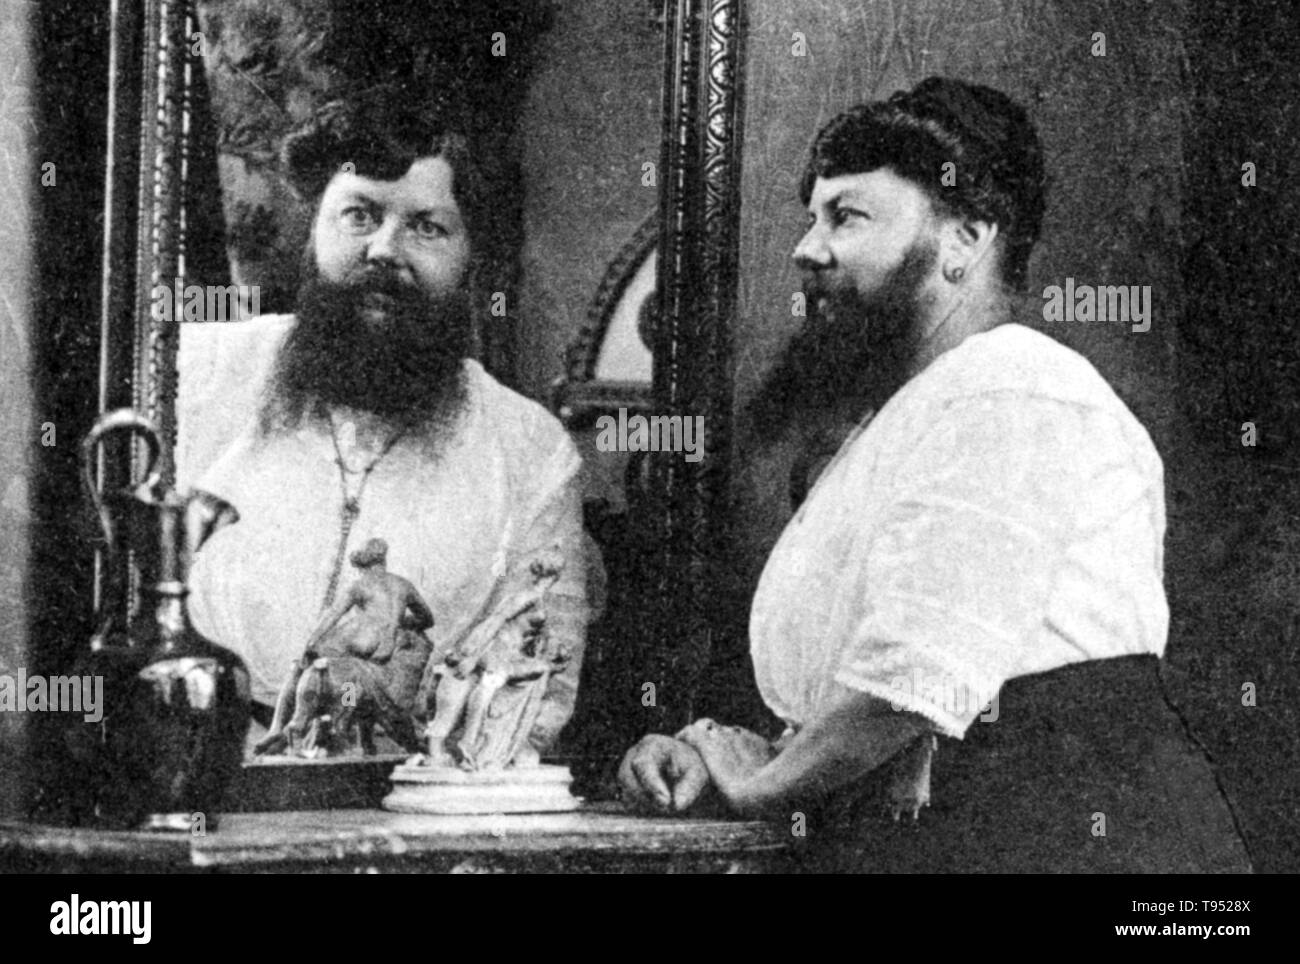 Clémentine Clatteaux Delait (March 5, 1865 - Apri 5, 1939) was a French bearded lady. Her facial hair began growing while she was a teenager. In 1885, she married a local baker, changed her name to Delait and opened a café and bakery in the village of Taon-les-Vosges. Until that point Clementine had shaved off her beard every day, but while working at the café she made a bet with a customer to let it grow. Stock Photo